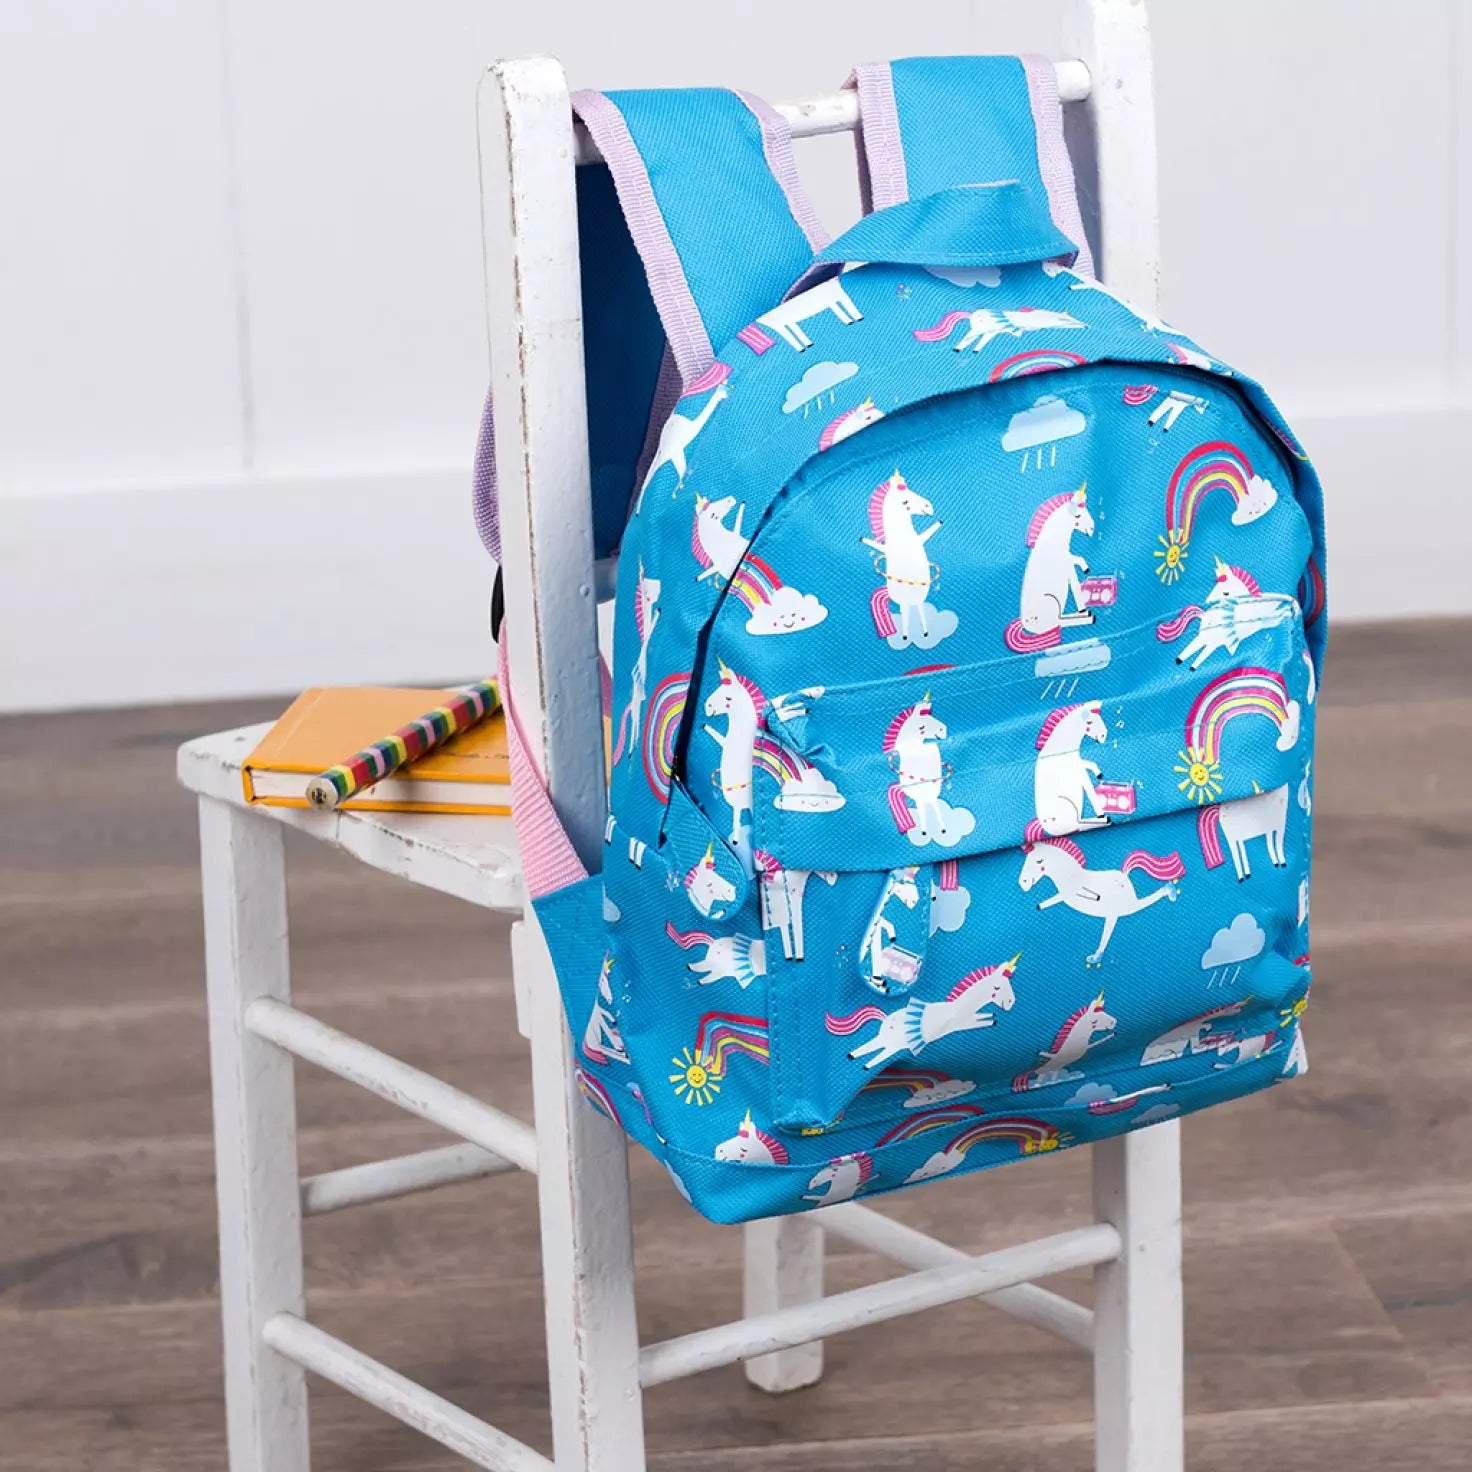 A child's backpack by Rex London, style Magical Unicorn,in blue with white multi unicorn and rainbow print, two compartments and zip fastenings. Lifestyle view.